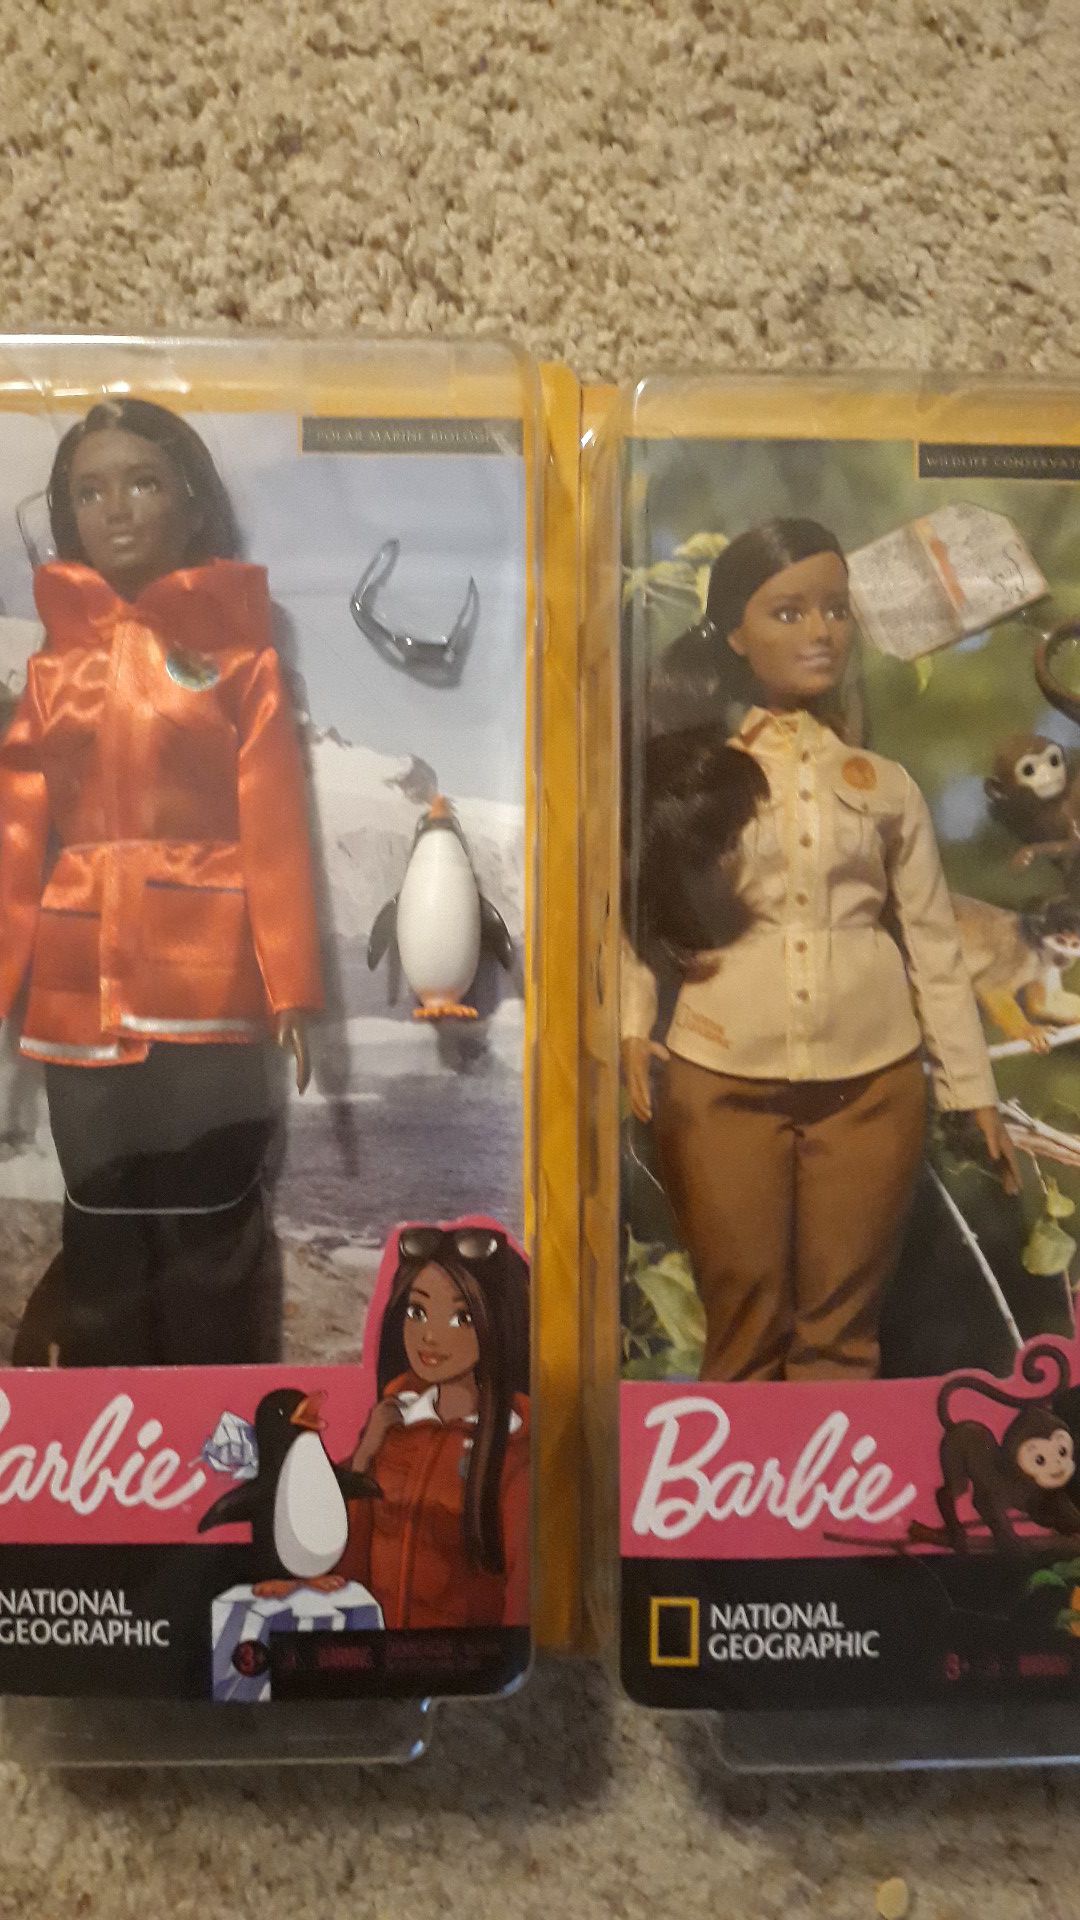 2 National geographic barbies